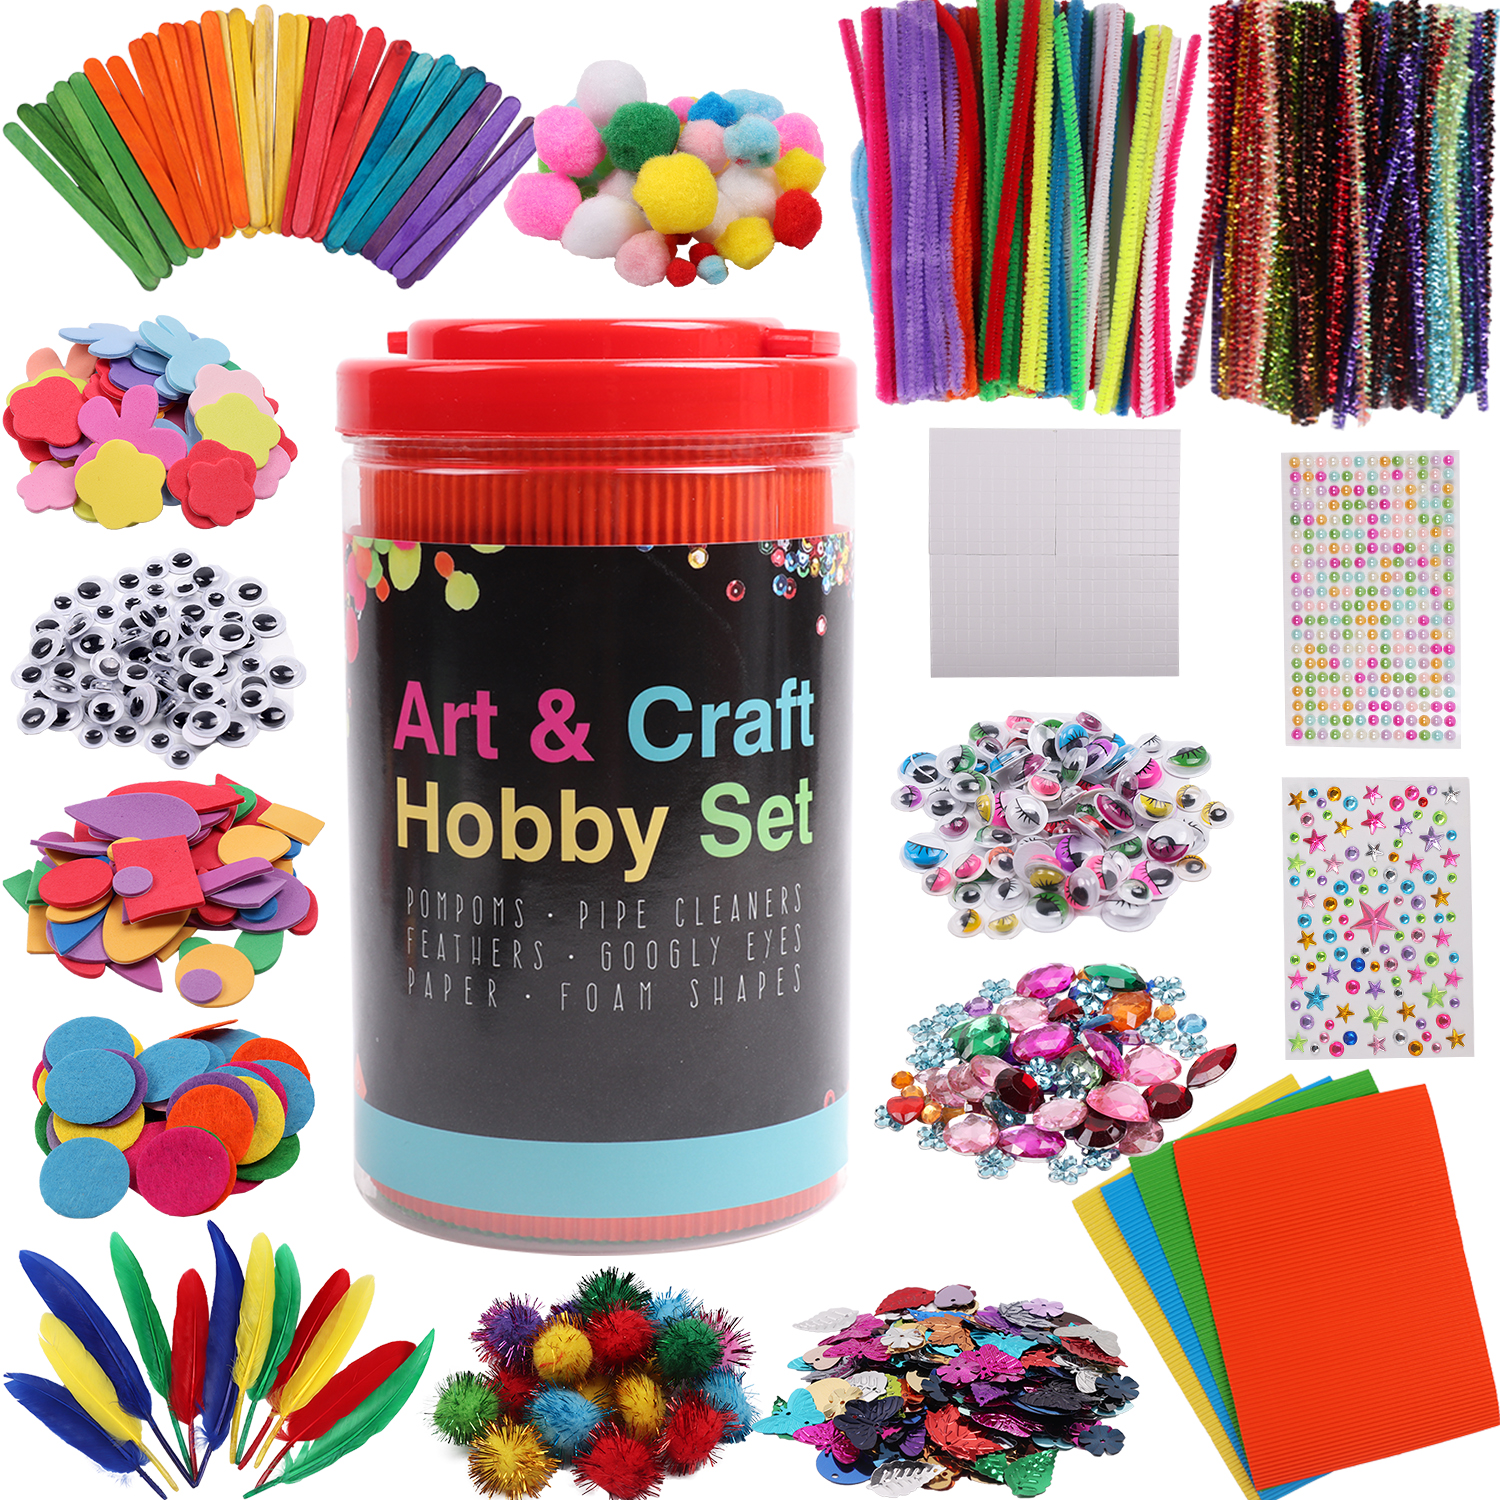 Hiveseen Arts and Crafts Supplies, Craft Materials Kits for Kids